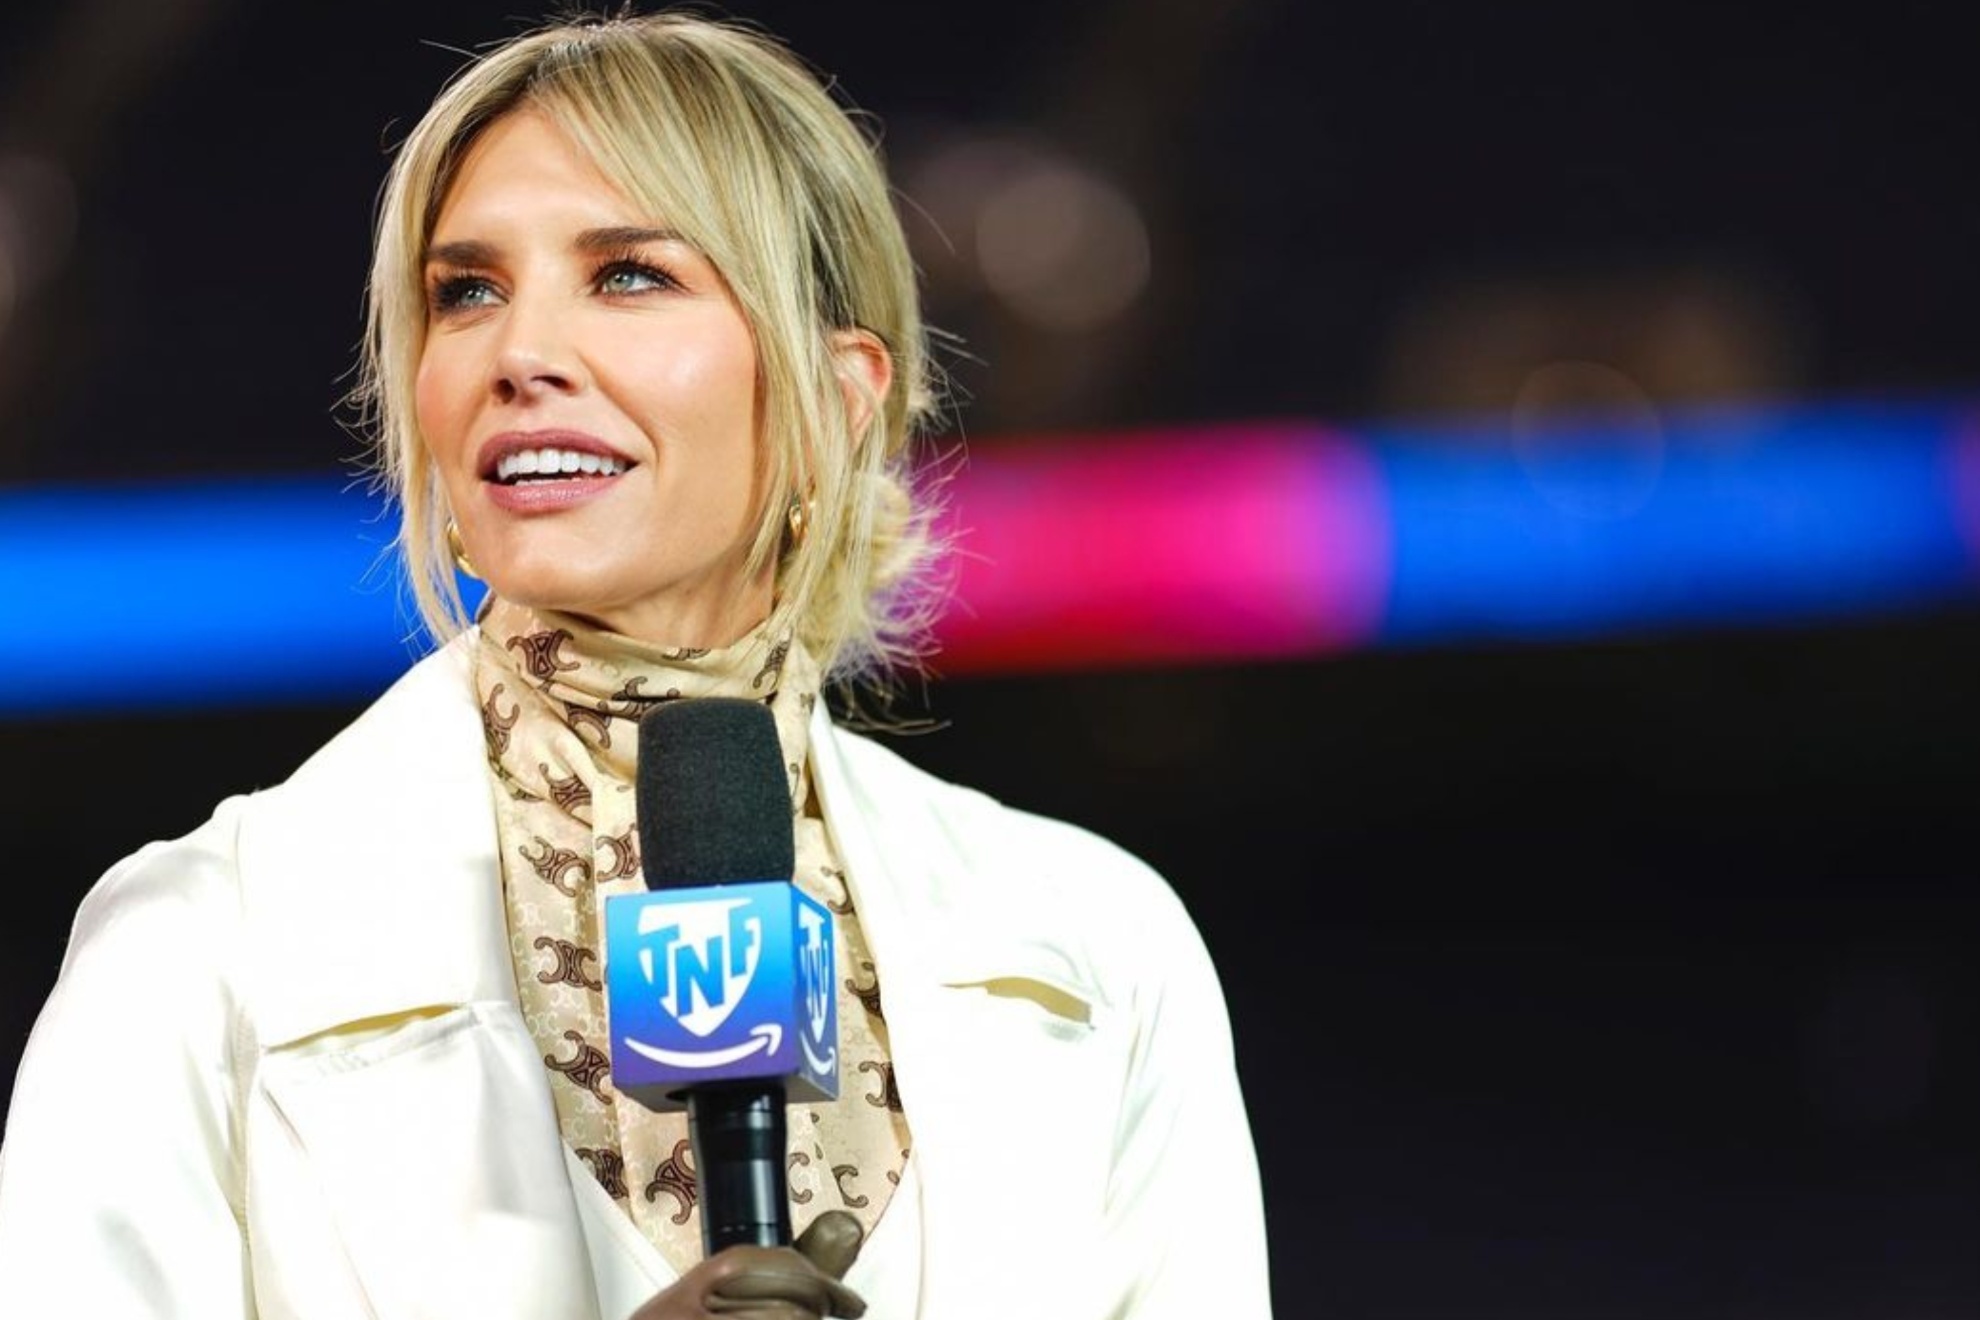 Charissa Thompson has a reported net worth of $3 million dollars